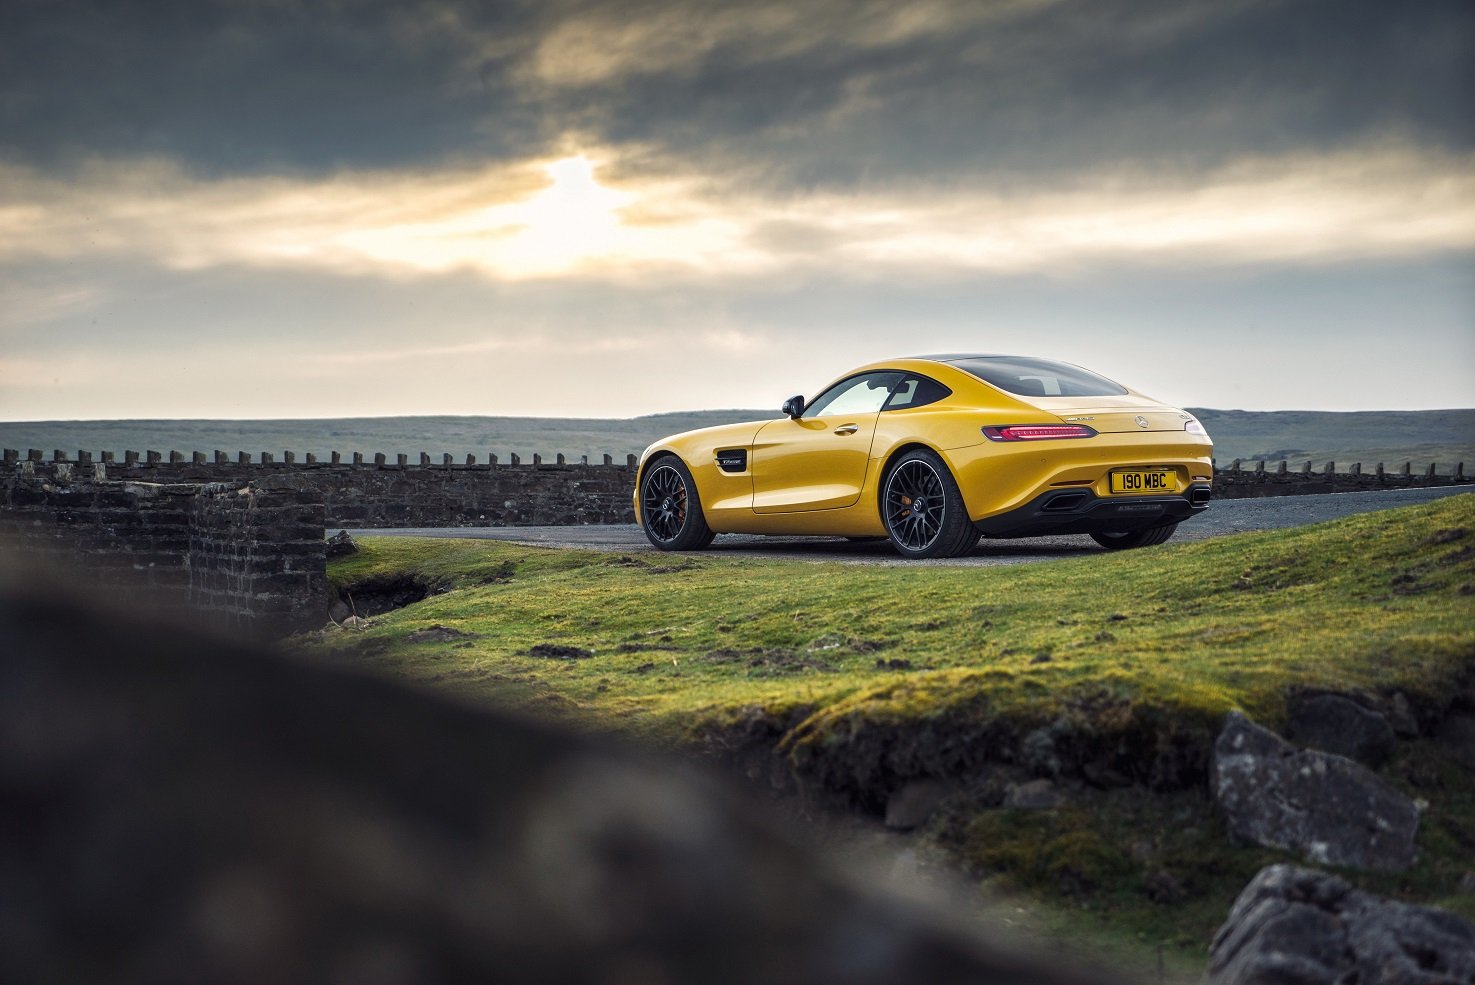 mercedes, Amg, Gt s, Uk spec, 2015, Coupe, Cars Wallpaper